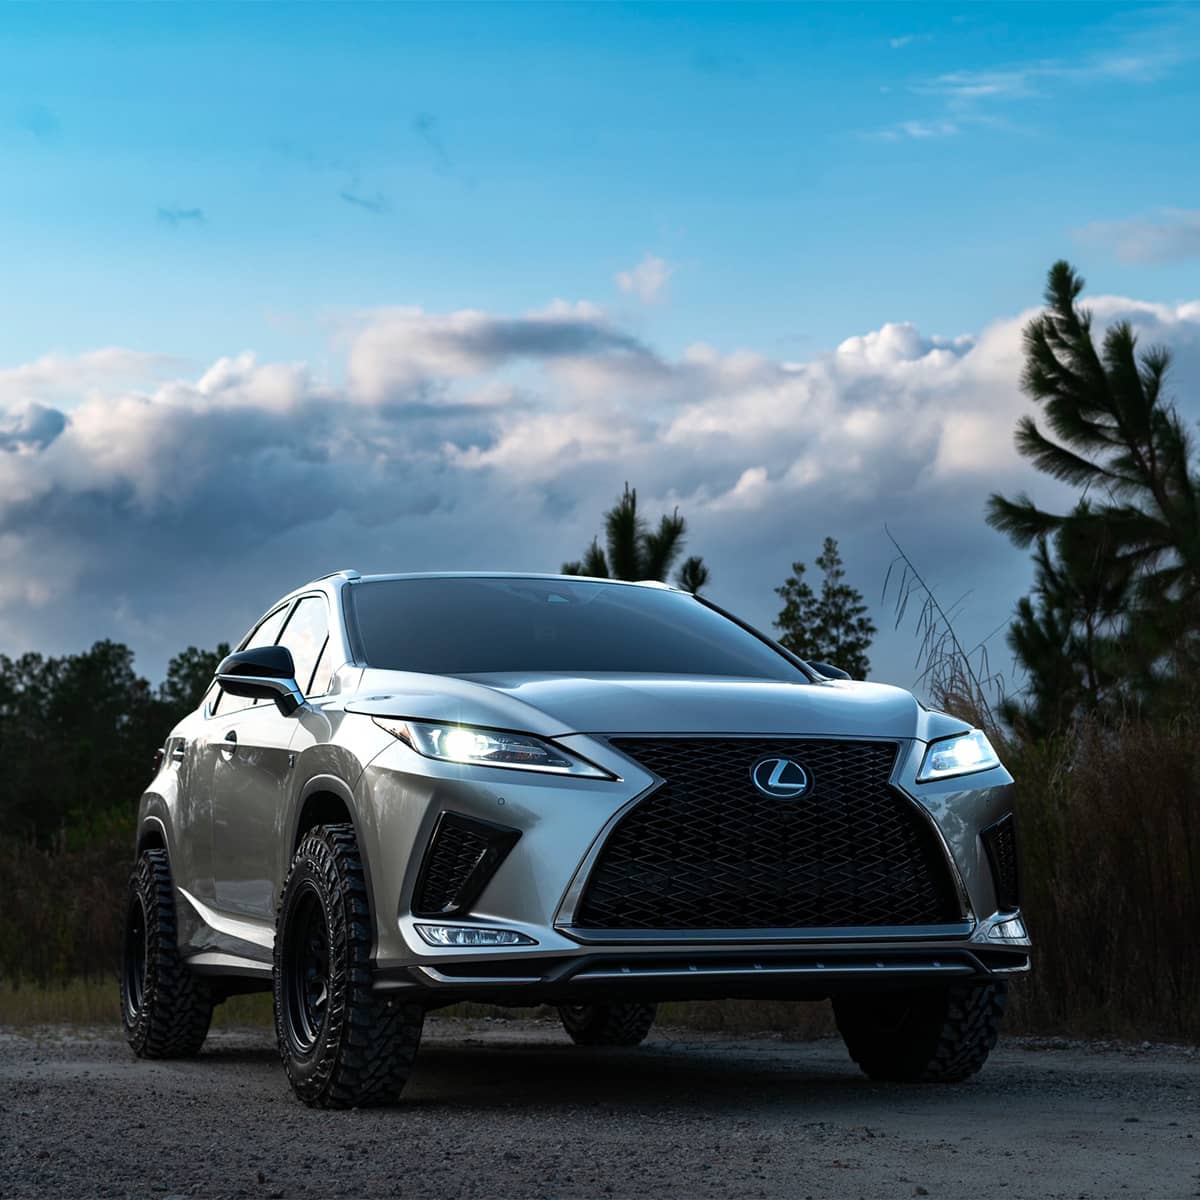 Best off-road mods and upgrades for Lexus RX350 crossover